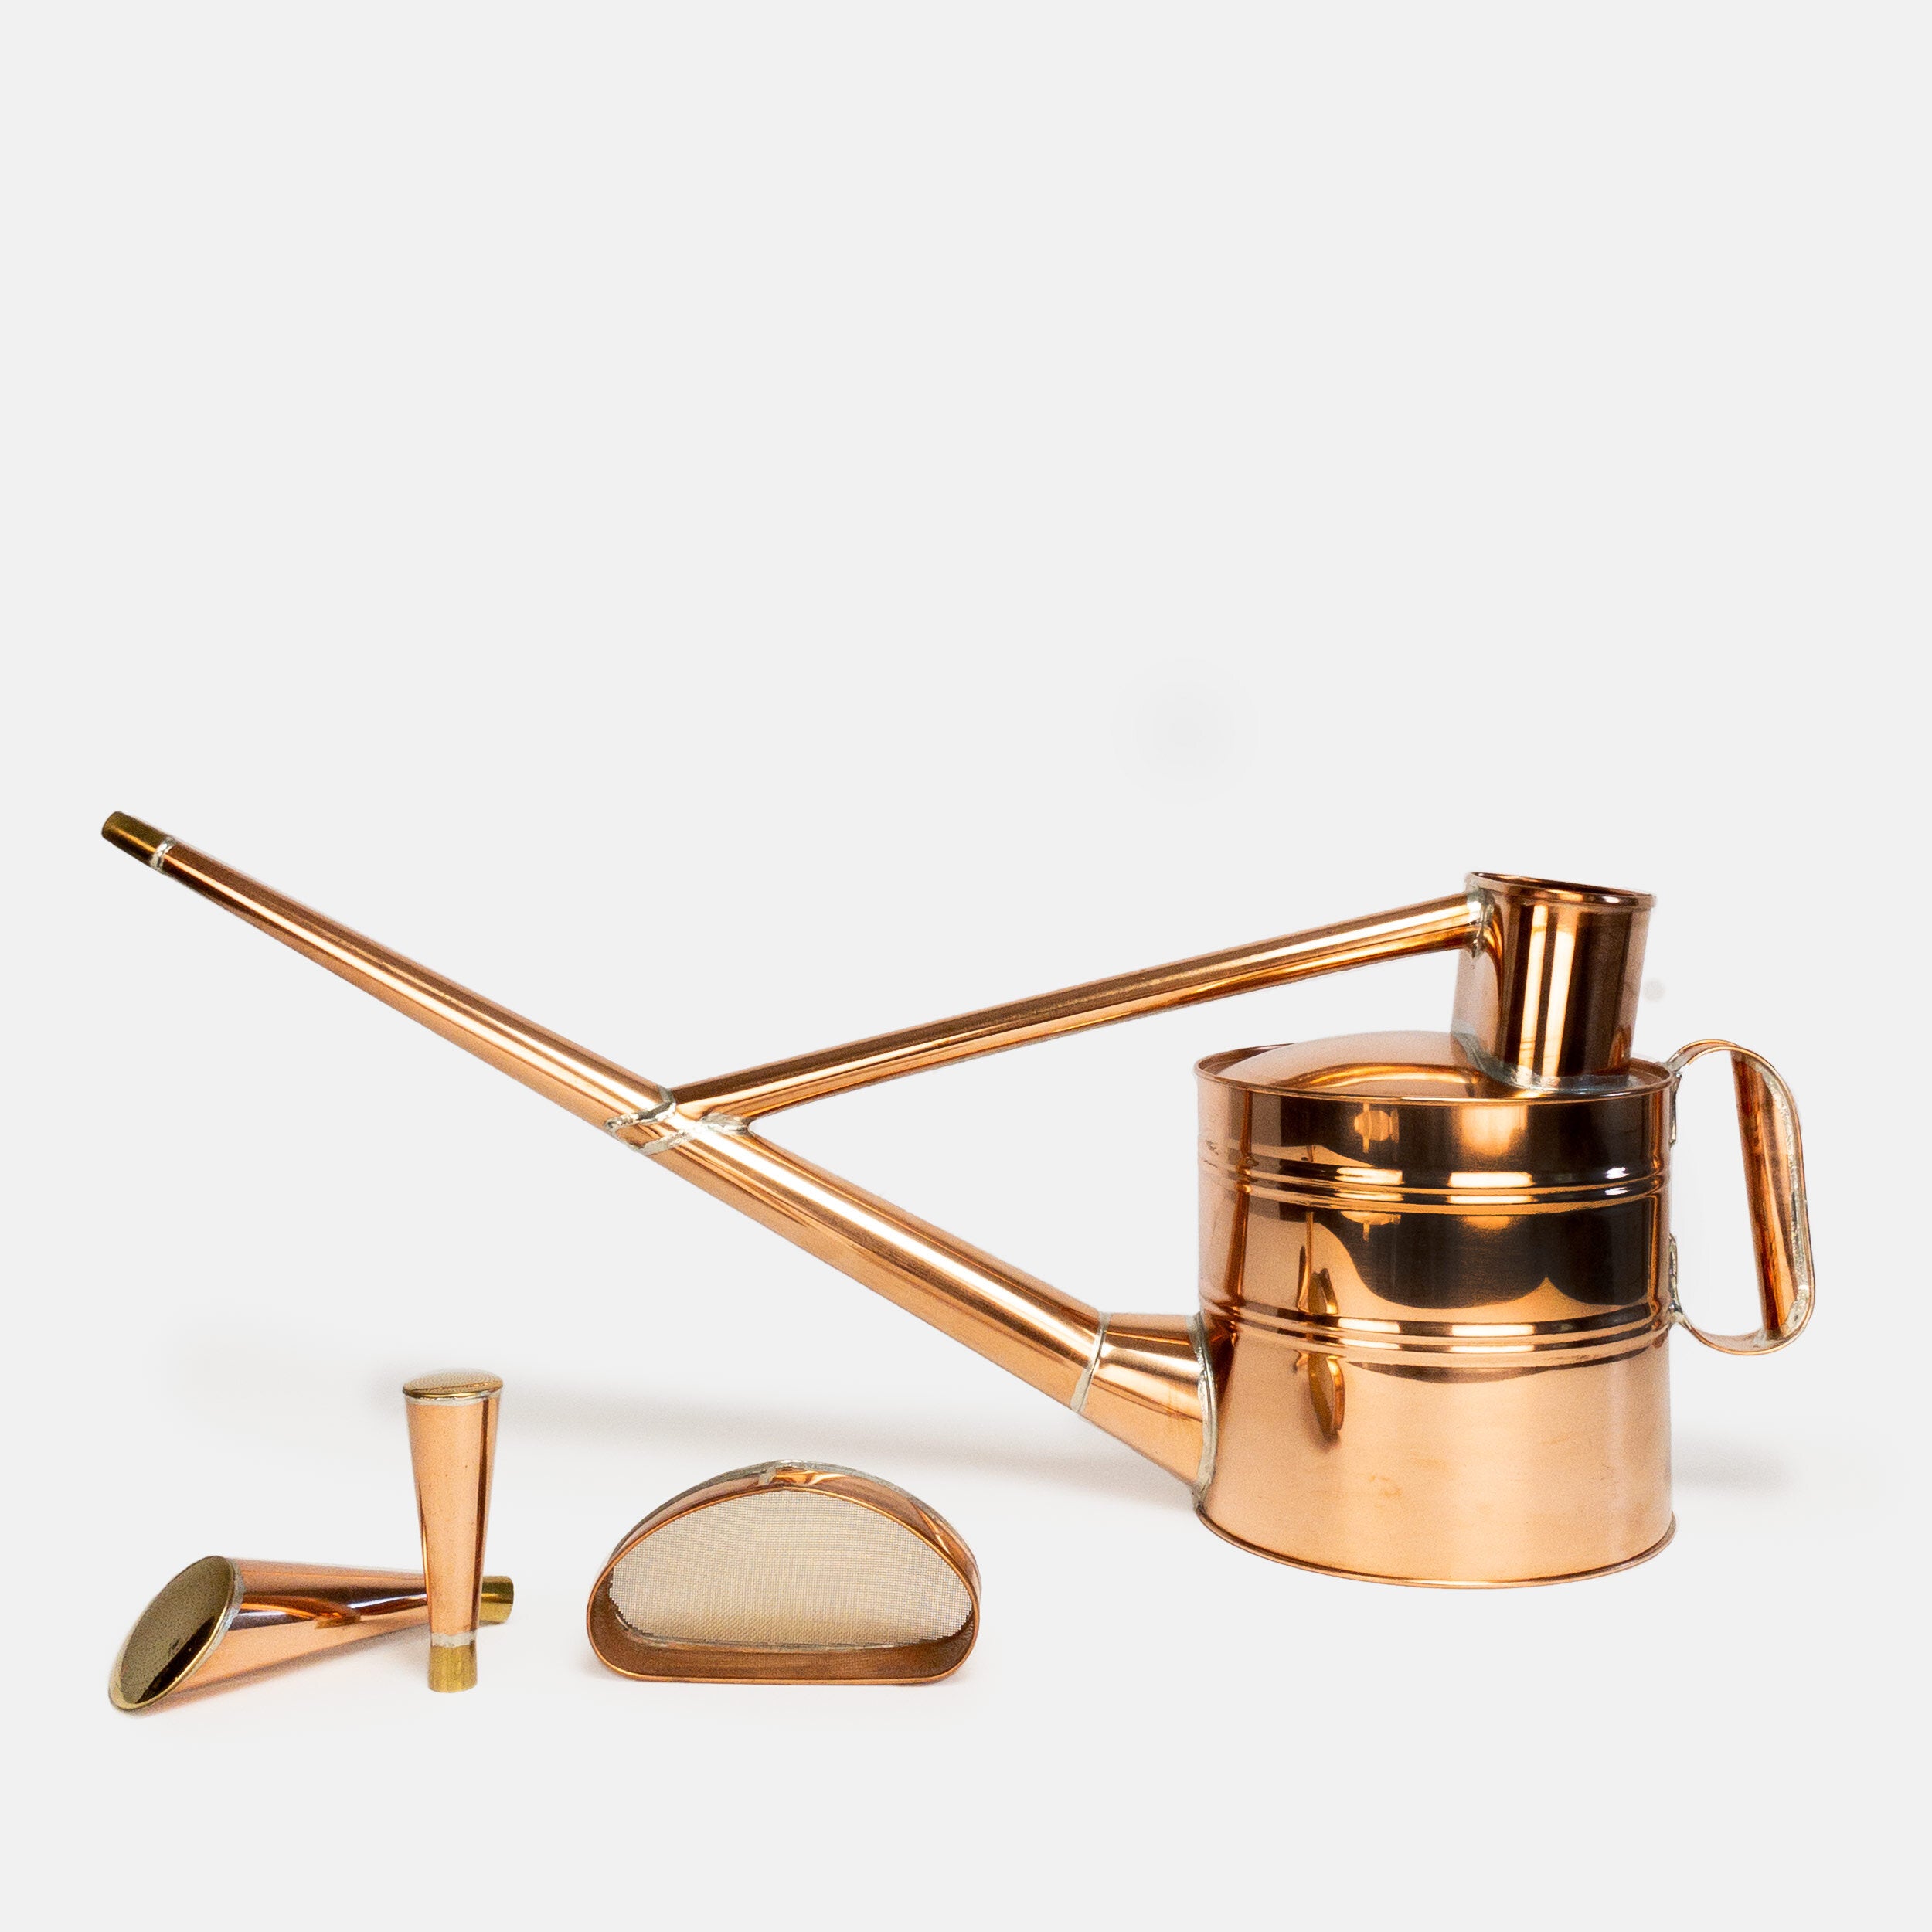 British Style Copper Watering Can No. 6 by Negishi Industry Co